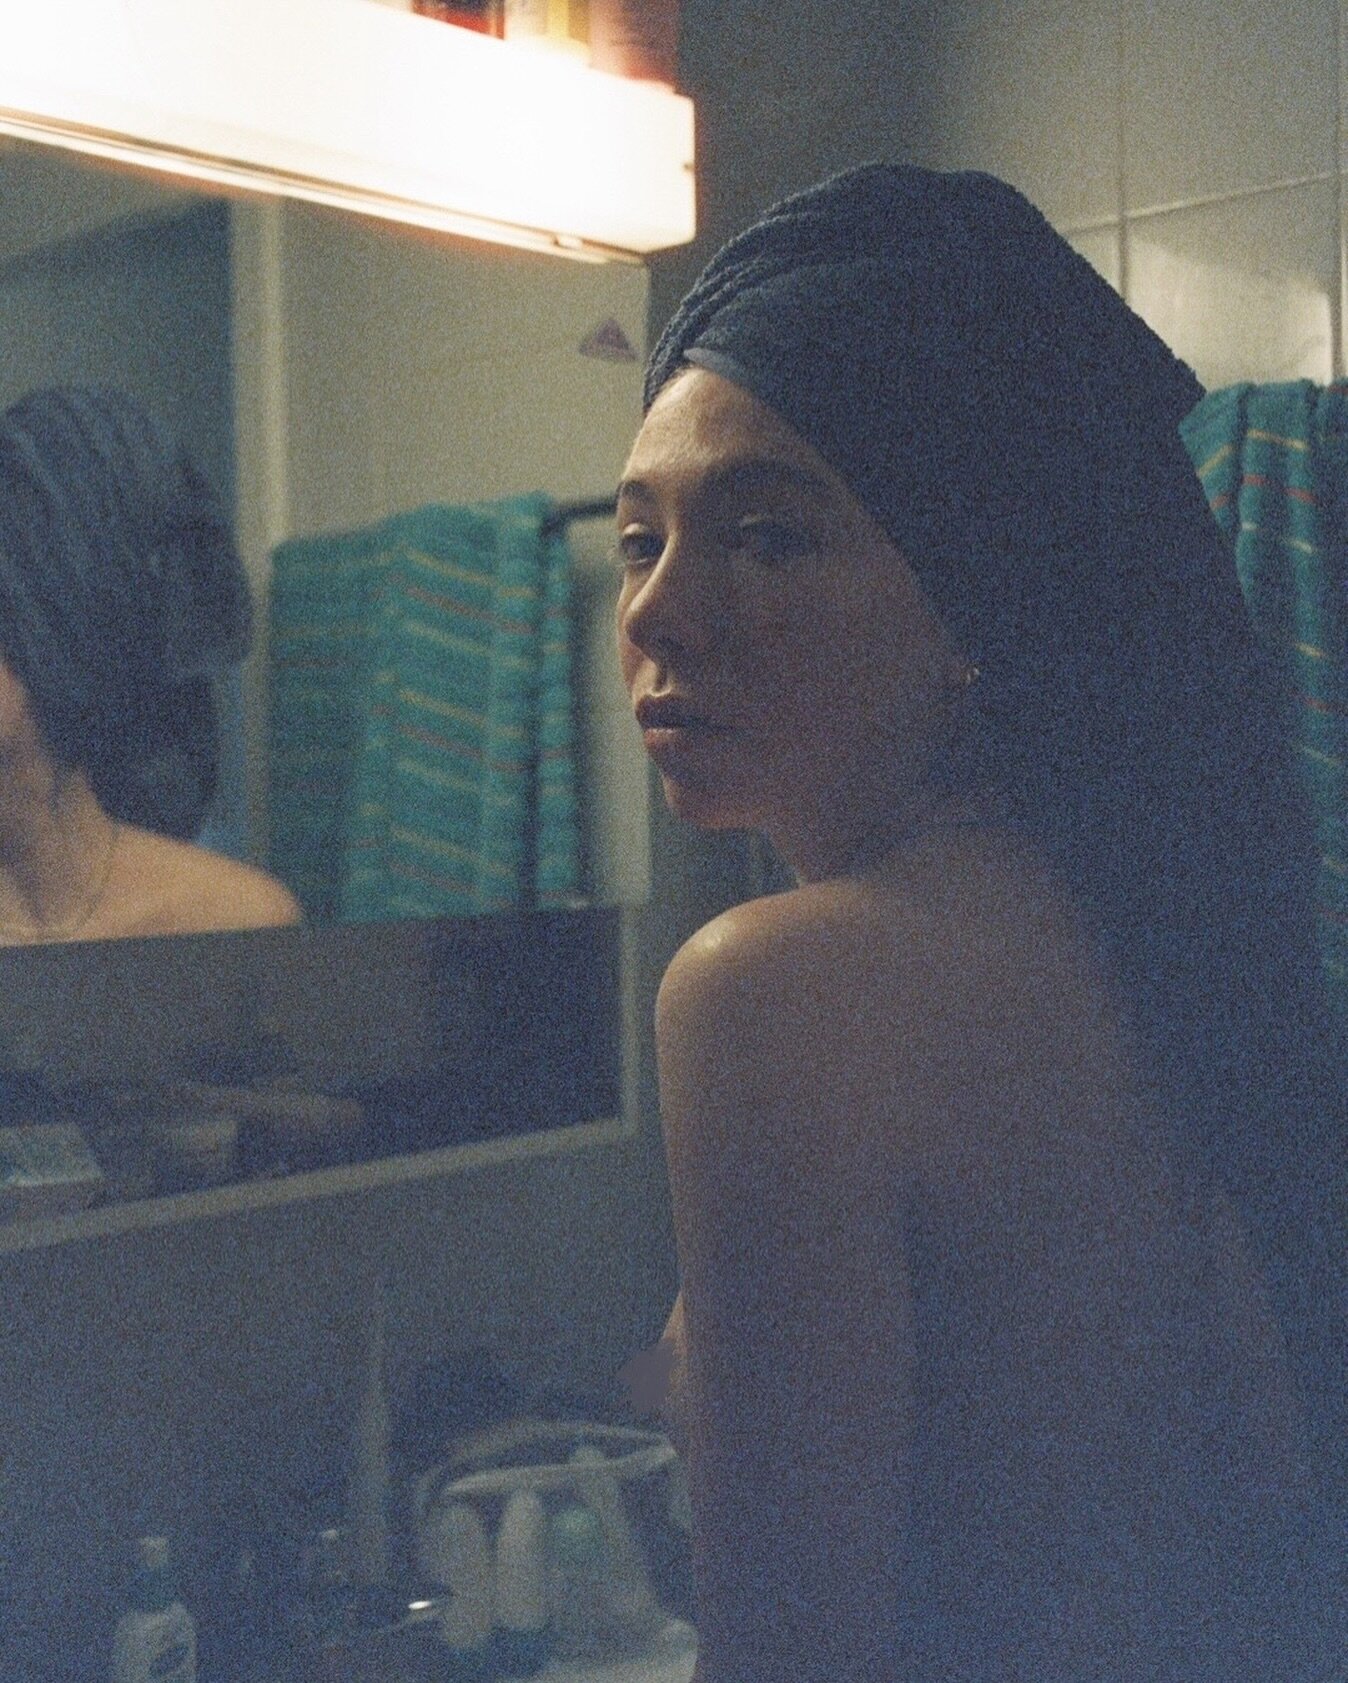 when moni was away and i entertained myself by making self portraits in their bathroom. this one gives me (unintentional) girl with a pearl earring vibes.